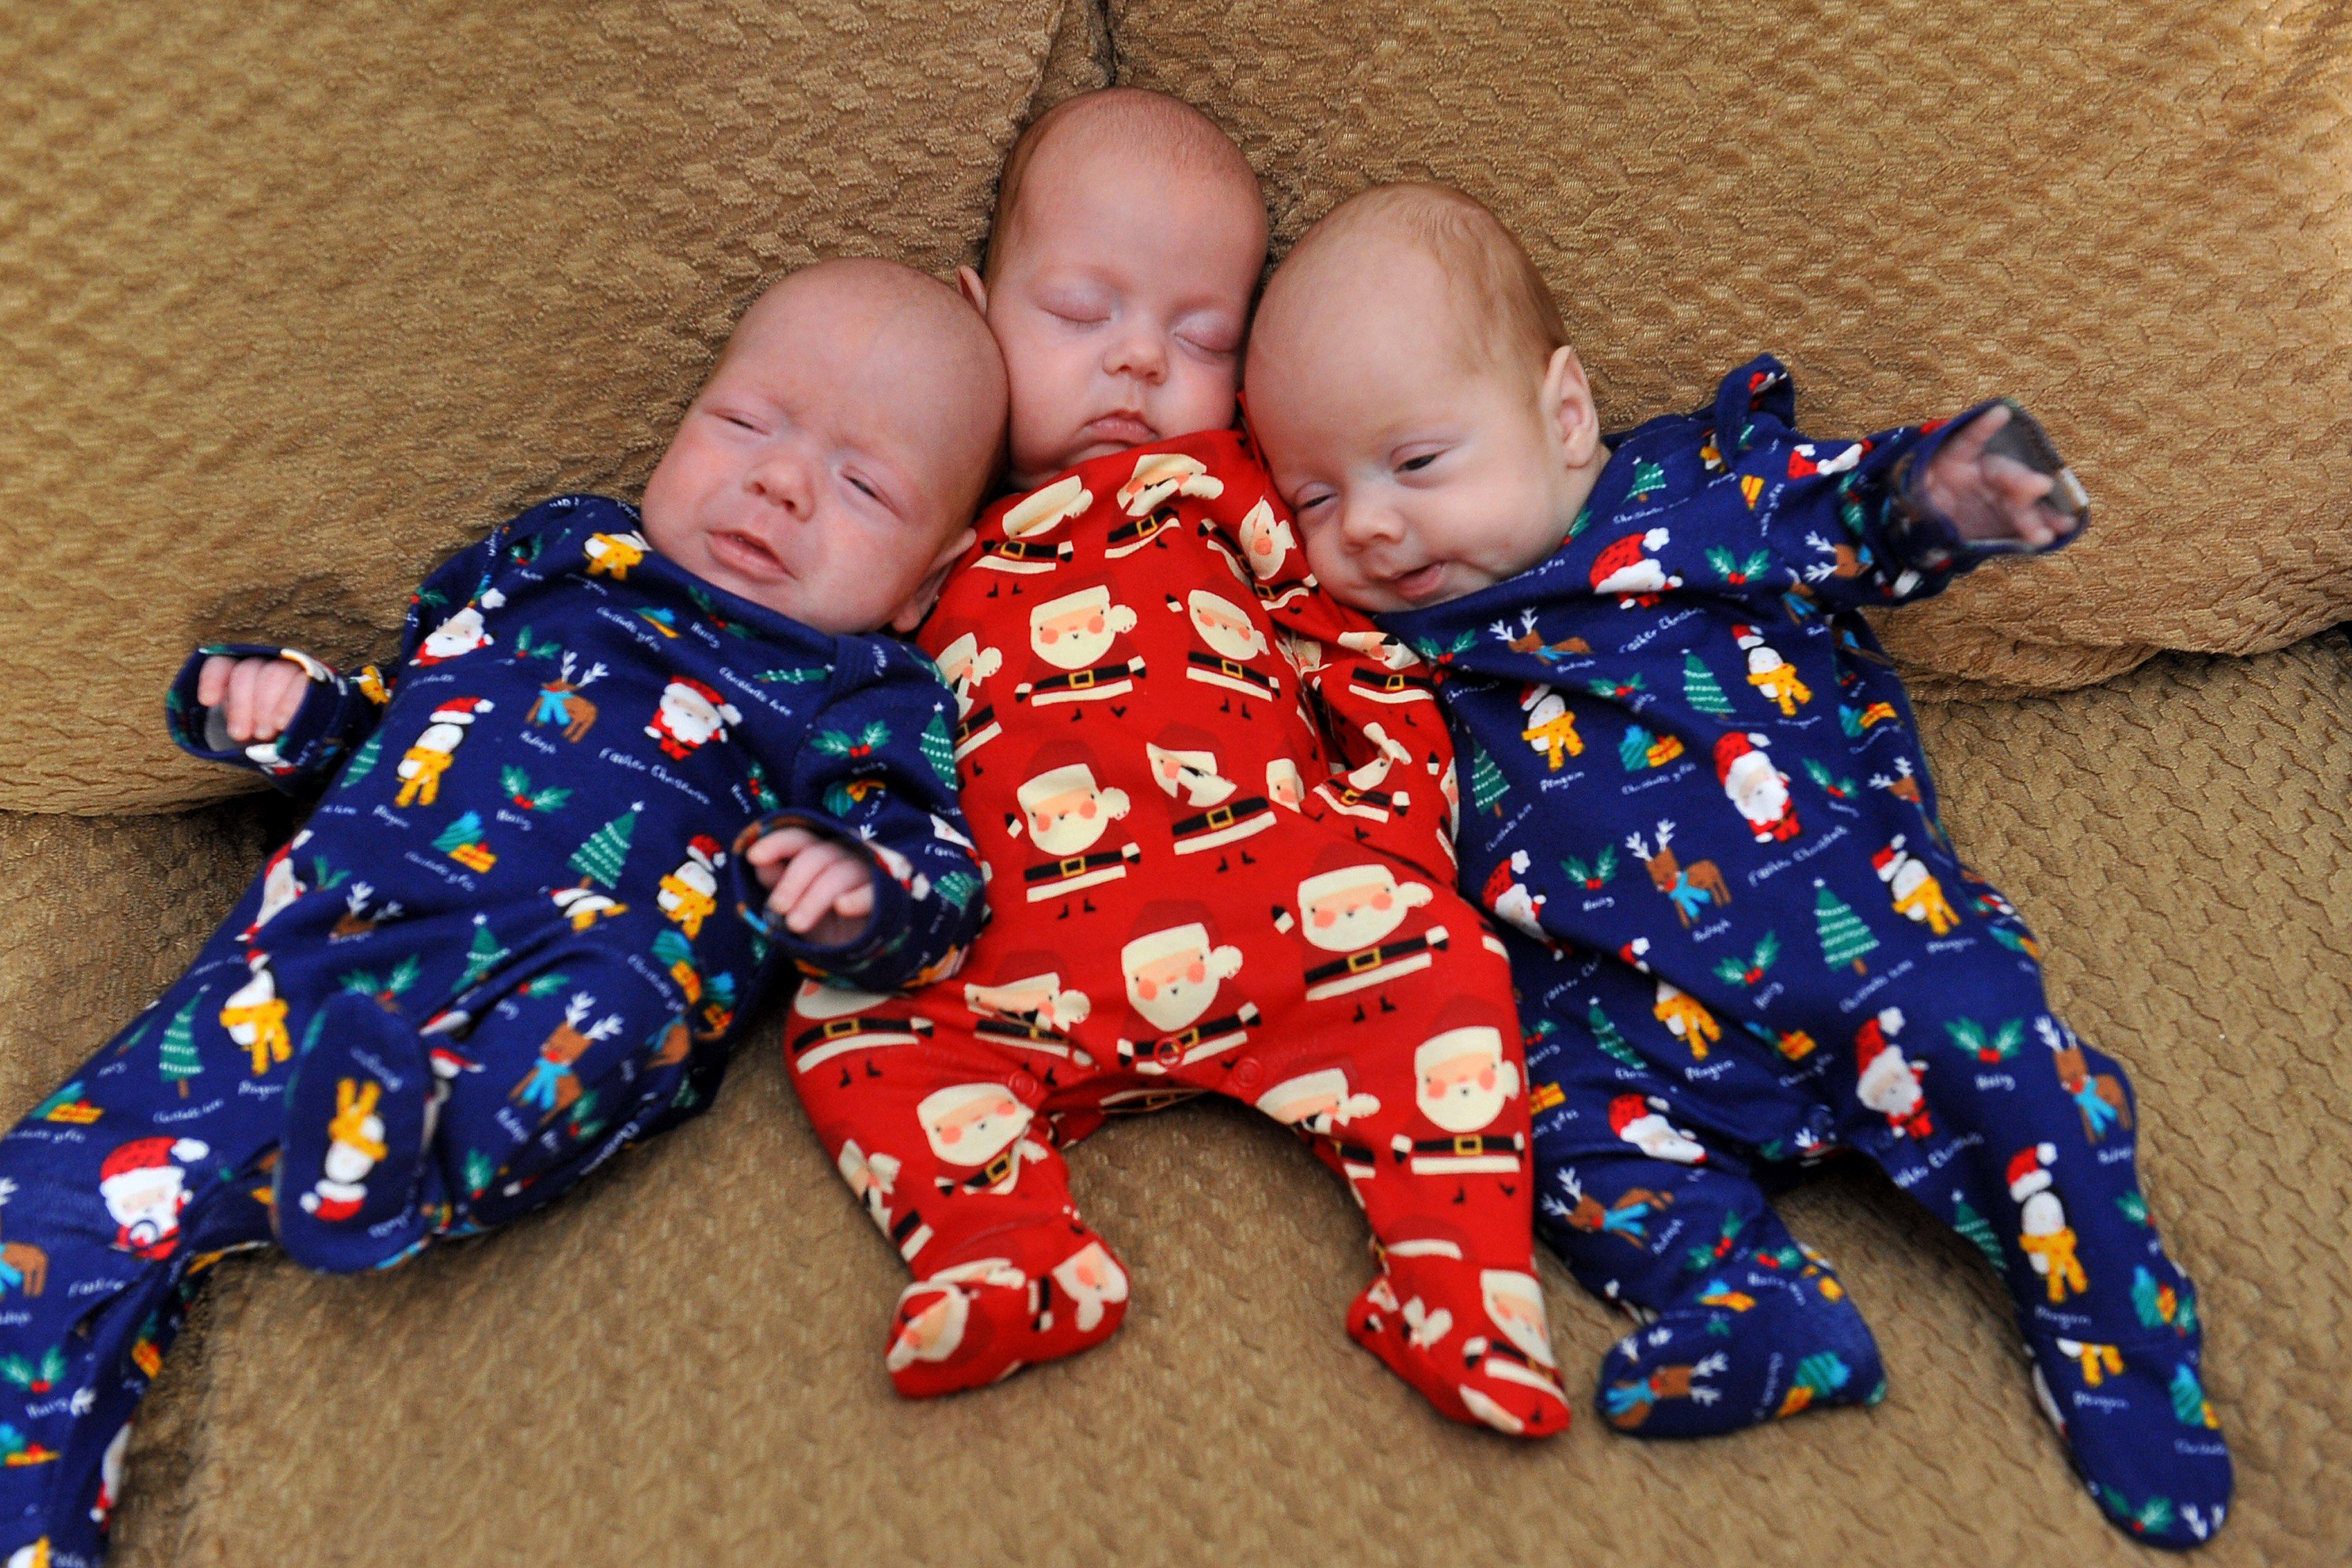 Yapton triplet's first Christmas. William, Violet, and Frank Pegrum